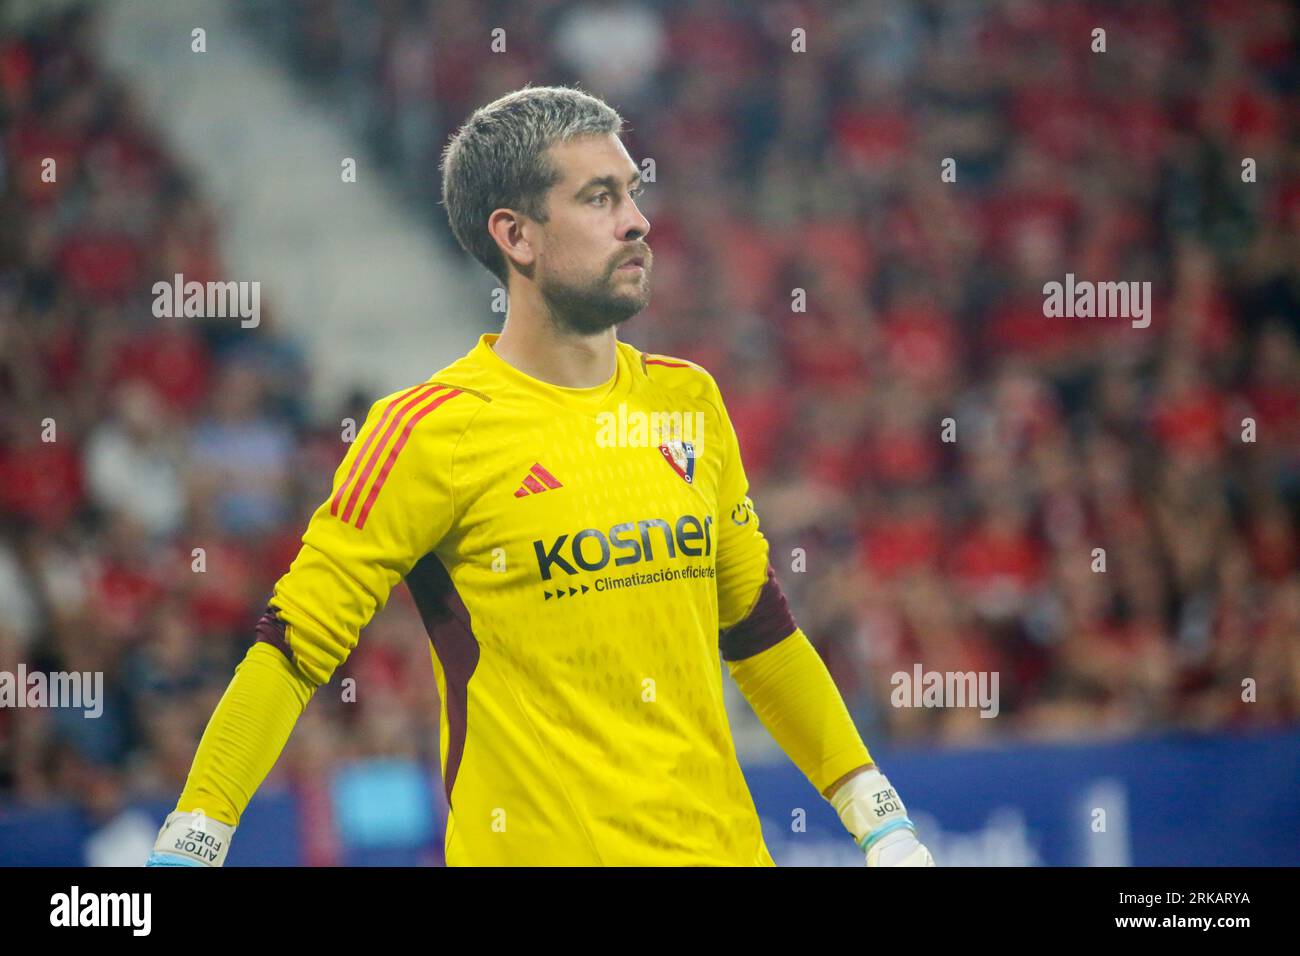 Pamplona, Spain, 24th August, 2023: CA Osasuna's goalkeeper, Aitor (13) during the first leg match of the 2023-24 UEFA Europa Conference League Preliminary Round between CA Osasuna and Club Brugge at El Estadio Sadar, in Pamplona, on August 24, 2023. Credit: Alberto Brevers / Alamy Live News. Stock Photo